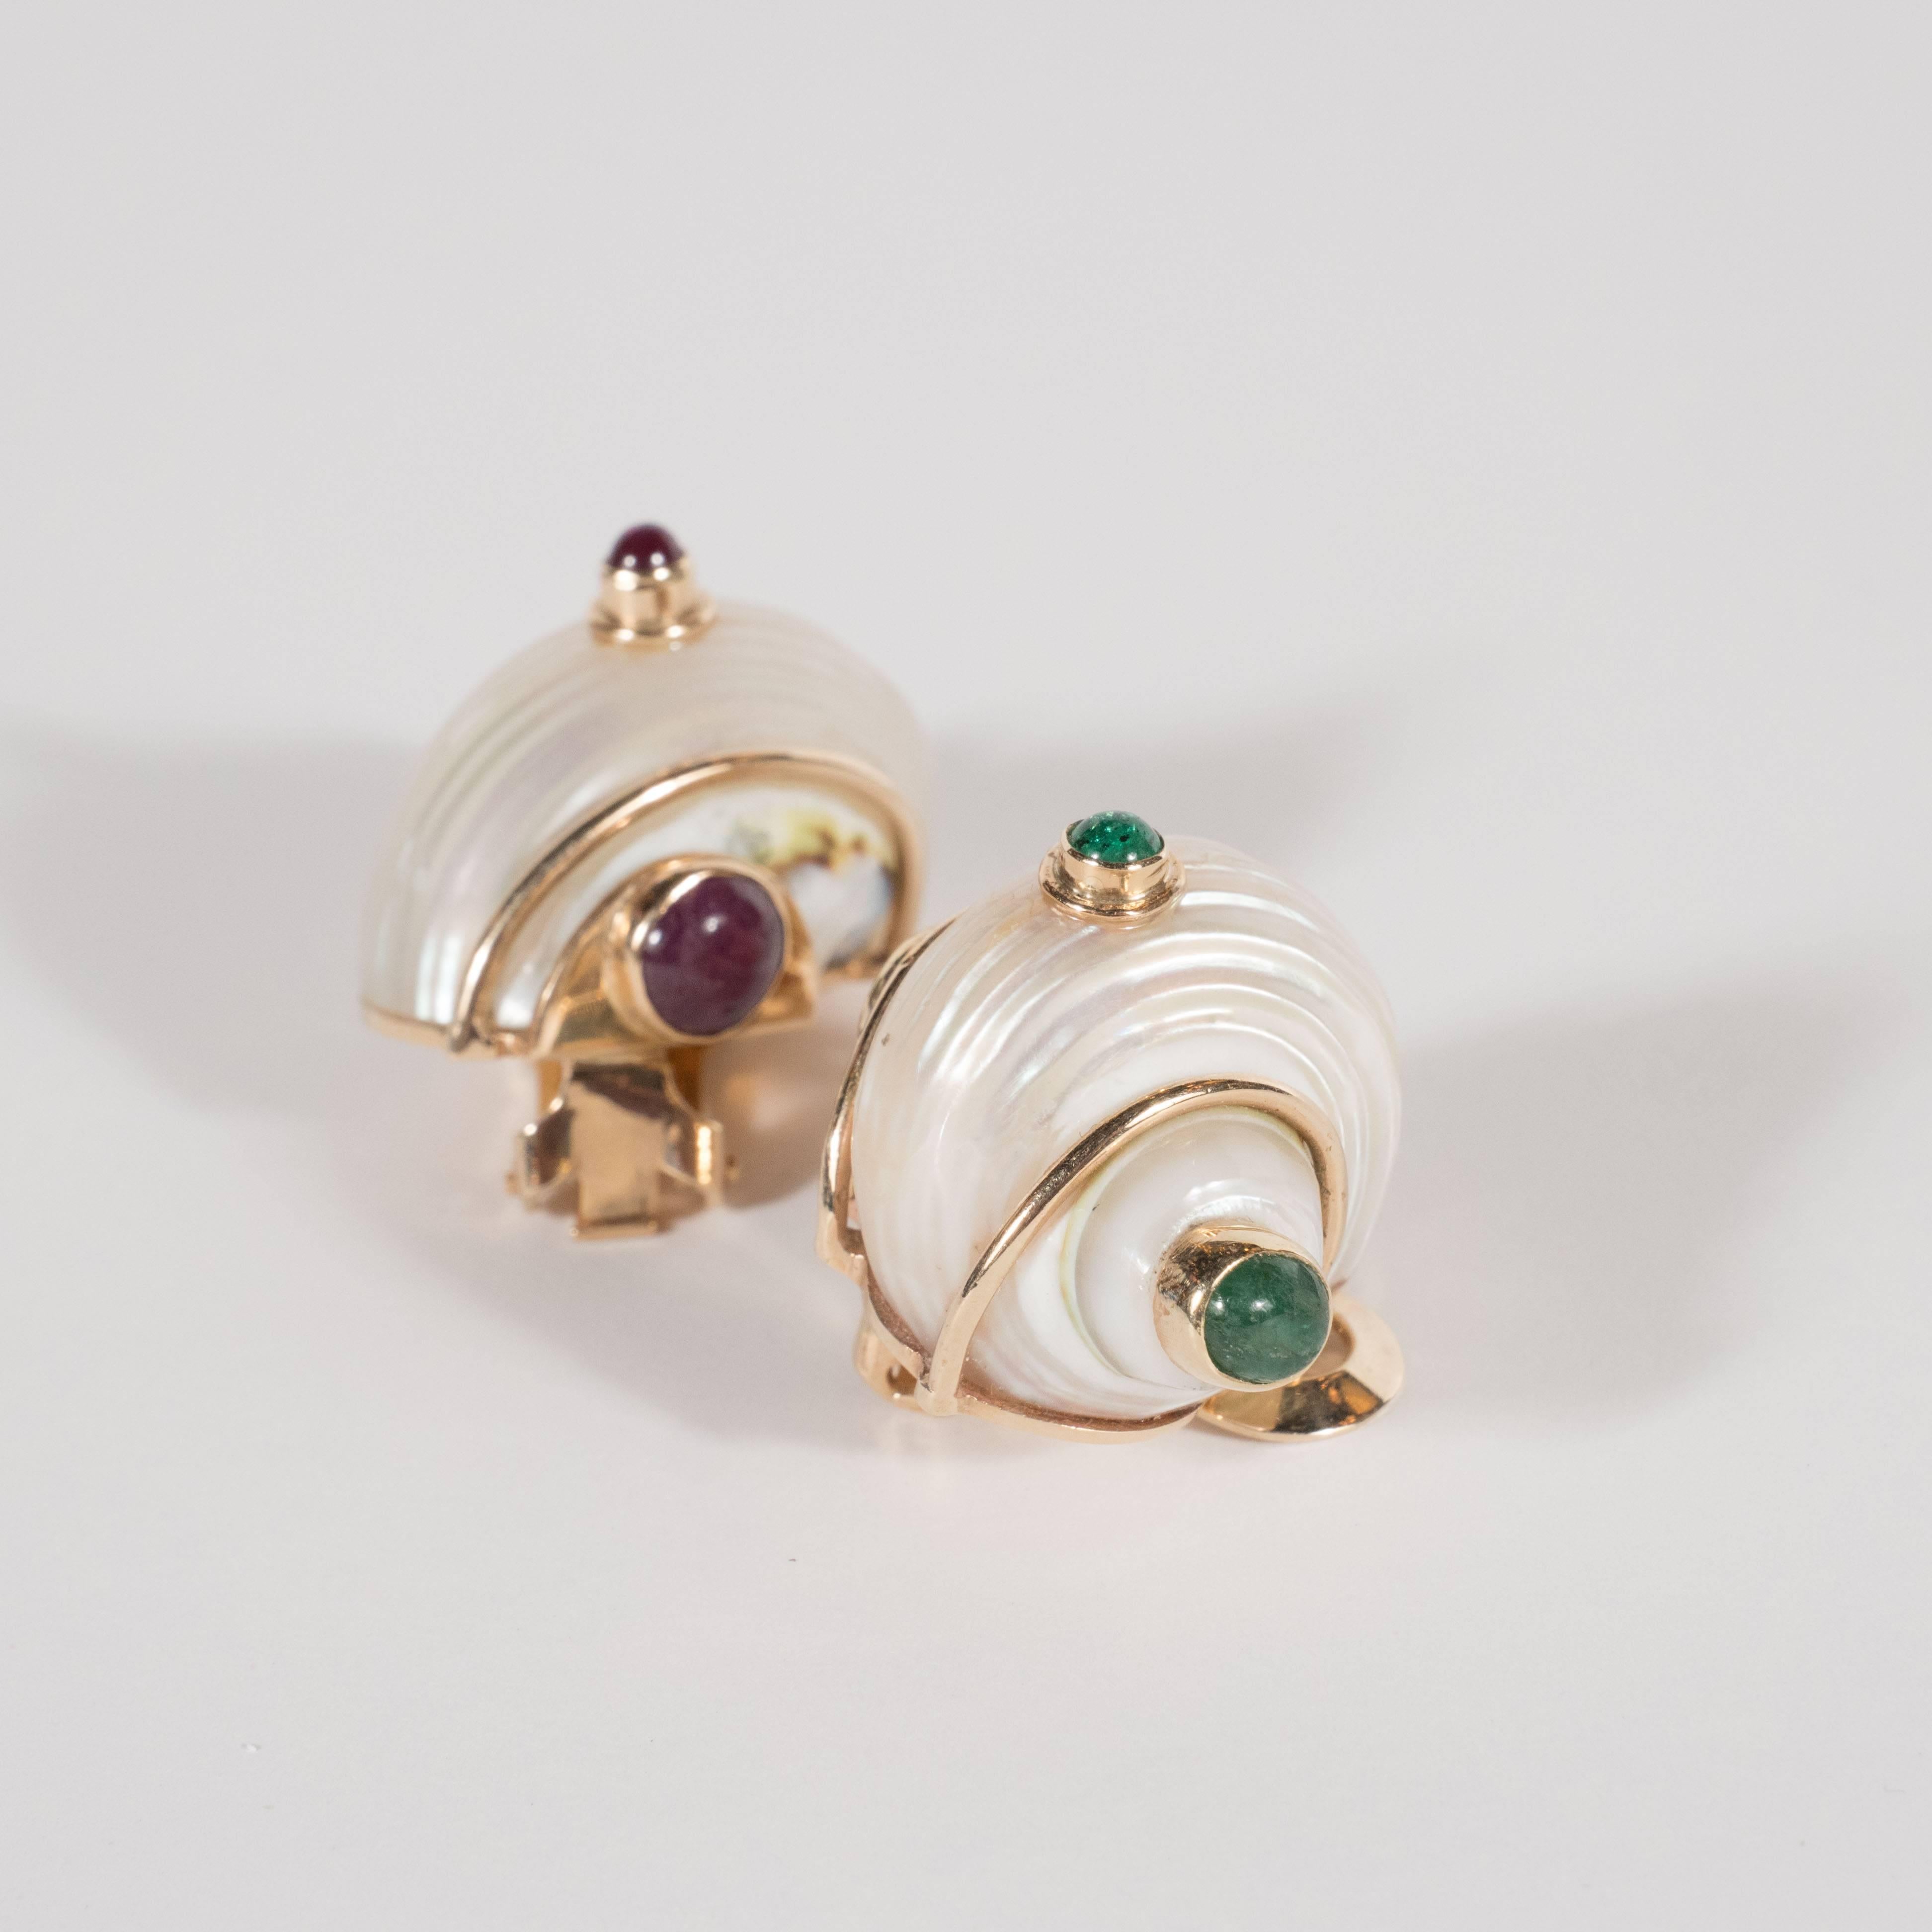 Modernist Mid-Century Seamann Schepps Shell Earrings with Cabachon Emeralds and Rubies